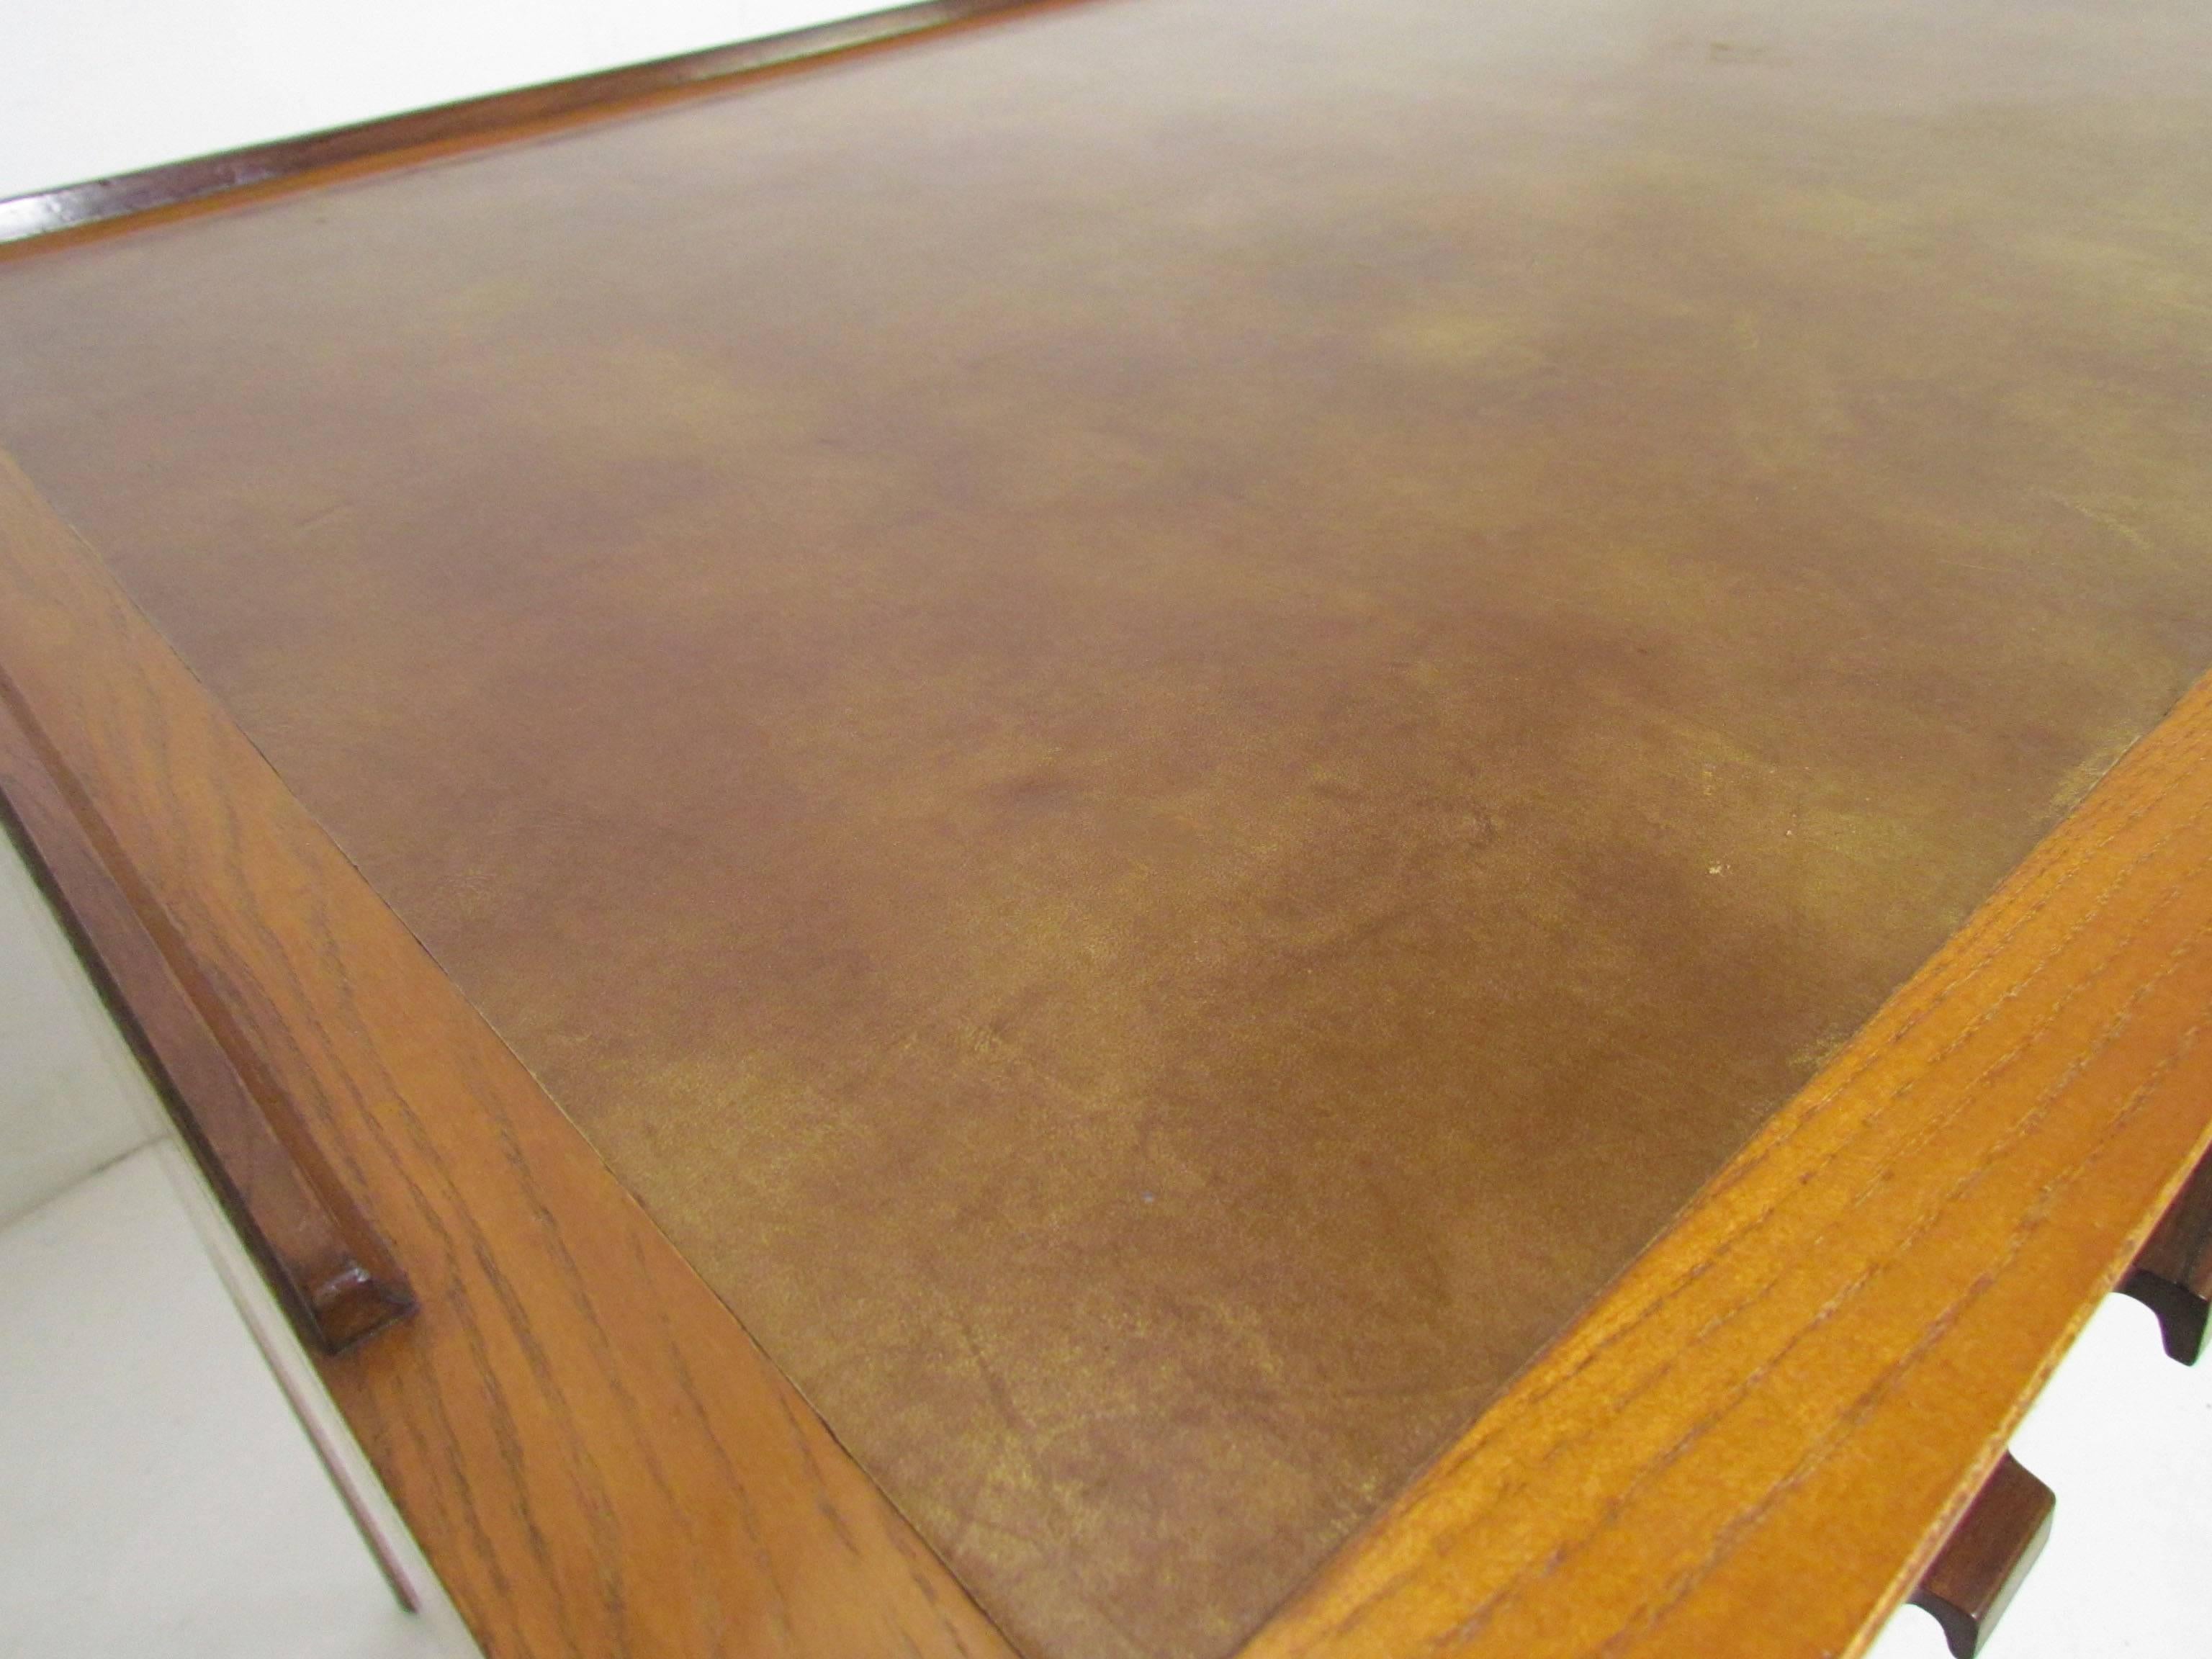 Rosewood Desk with Leather Top by Edward Wormley for Dunbar 1